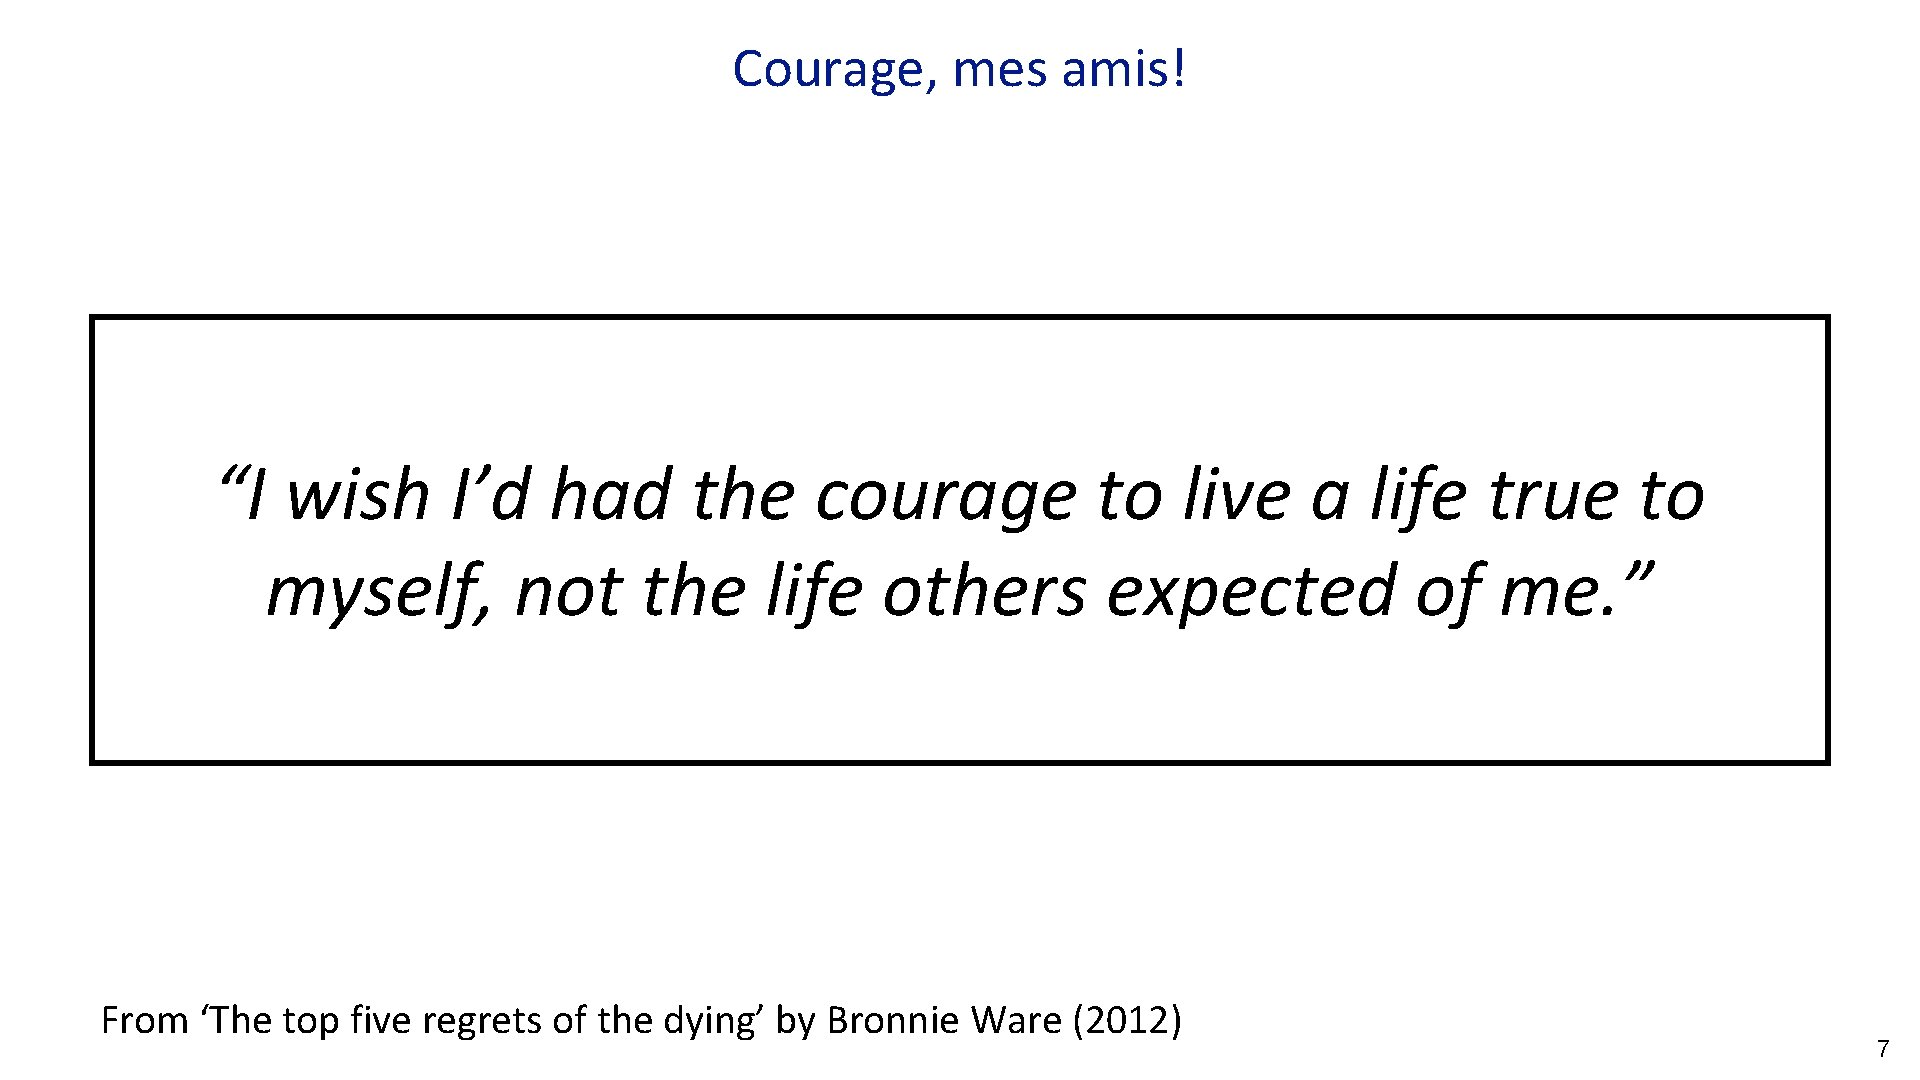 Courage, mes amis! “I wish I’d had the courage to live a life true